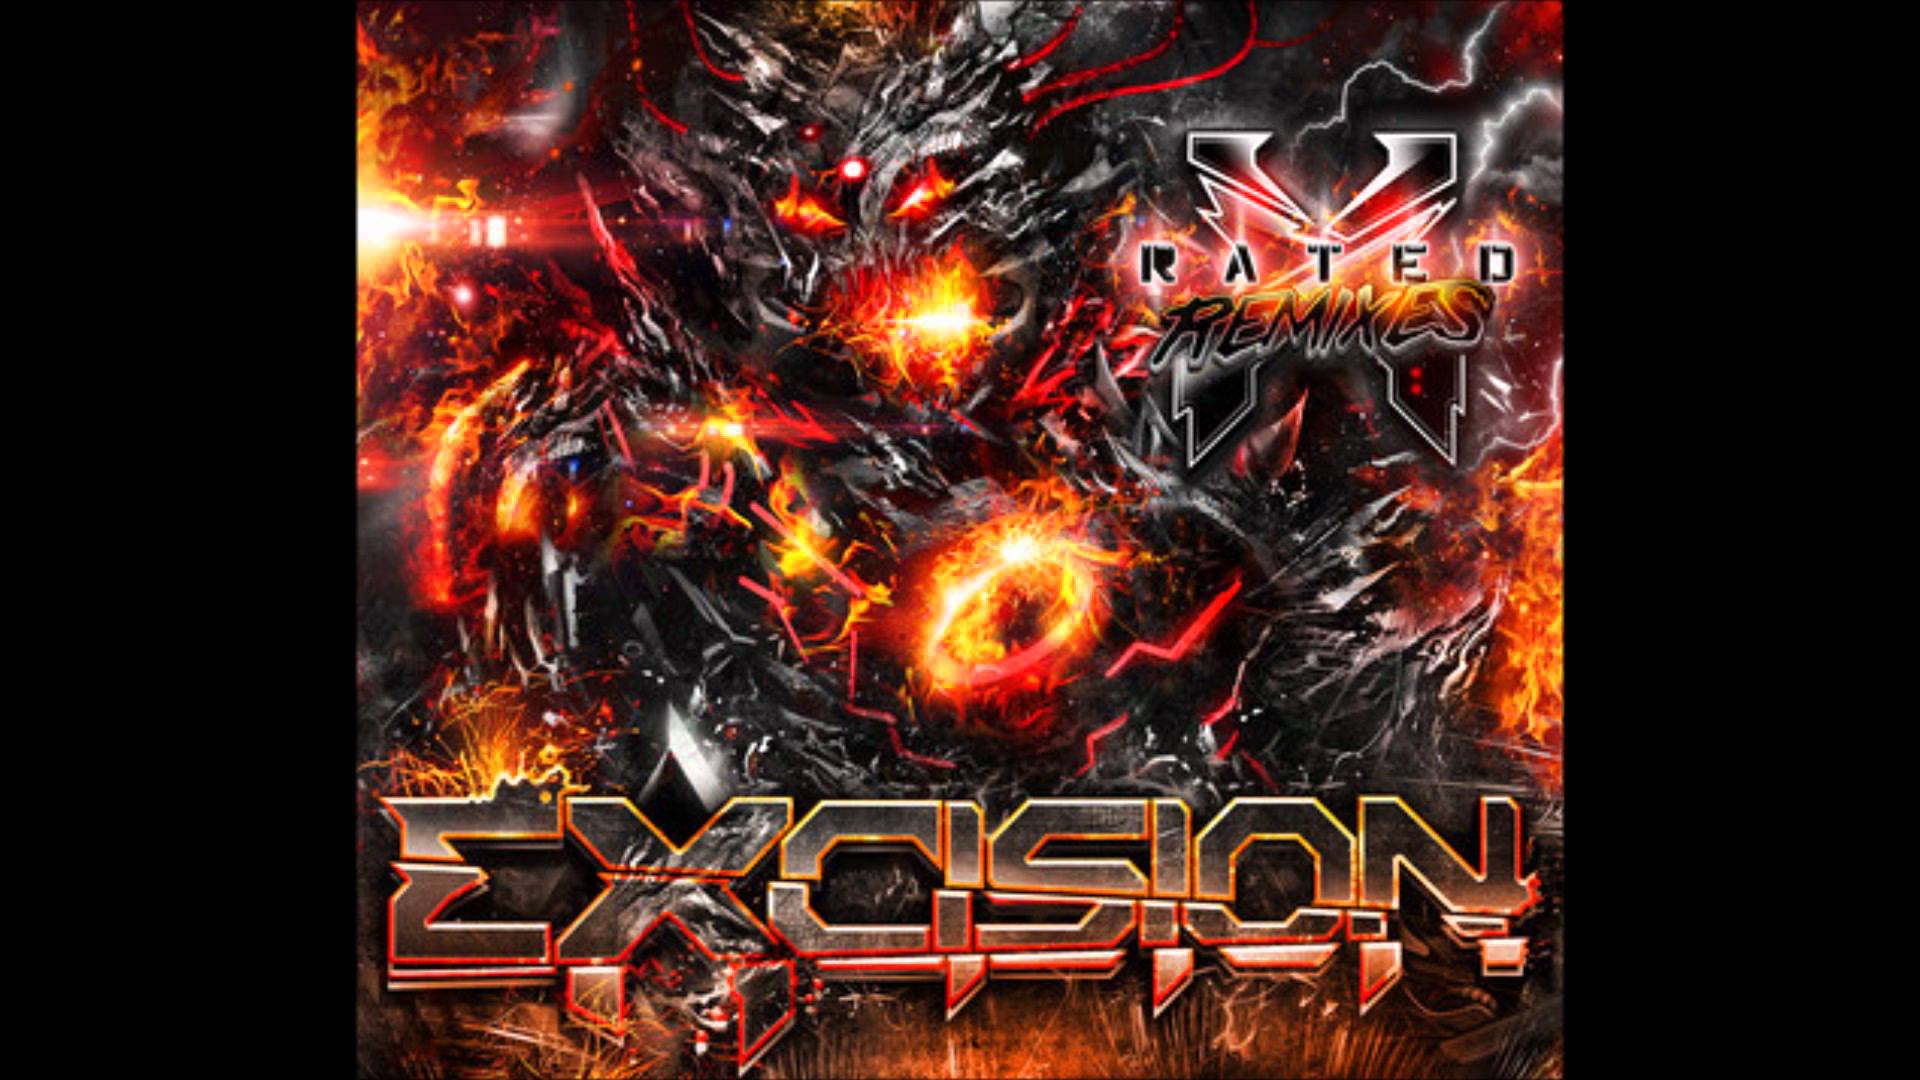 Wallpaper For > Excision Wallpaper